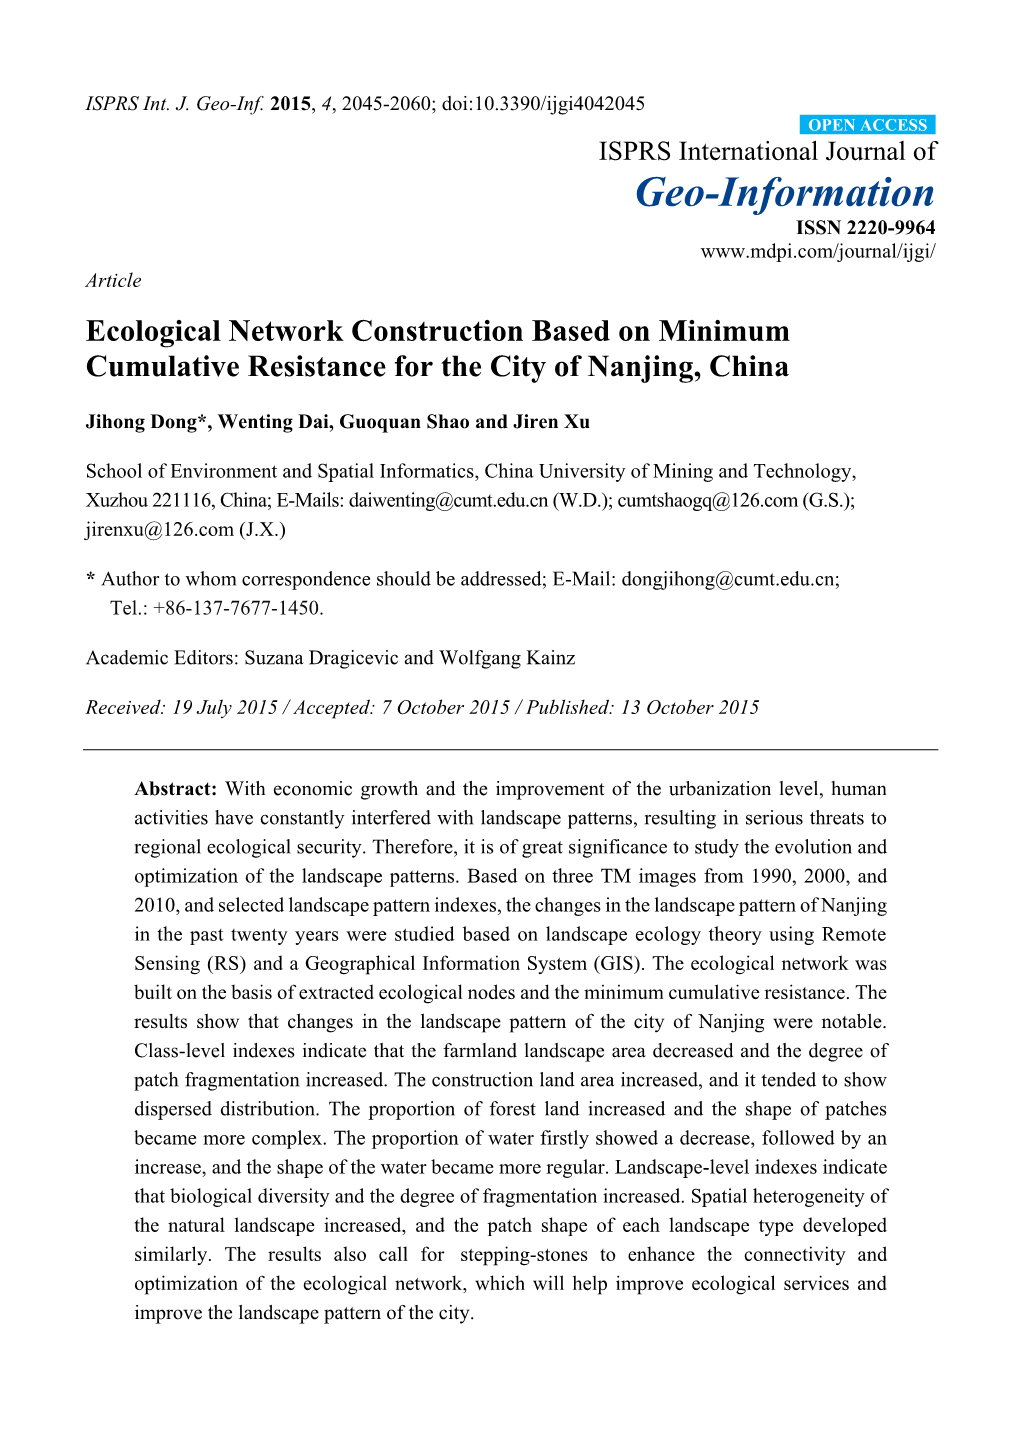 Ecological Network Construction Based on Minimum Cumulative Resistance for the City of Nanjing, China